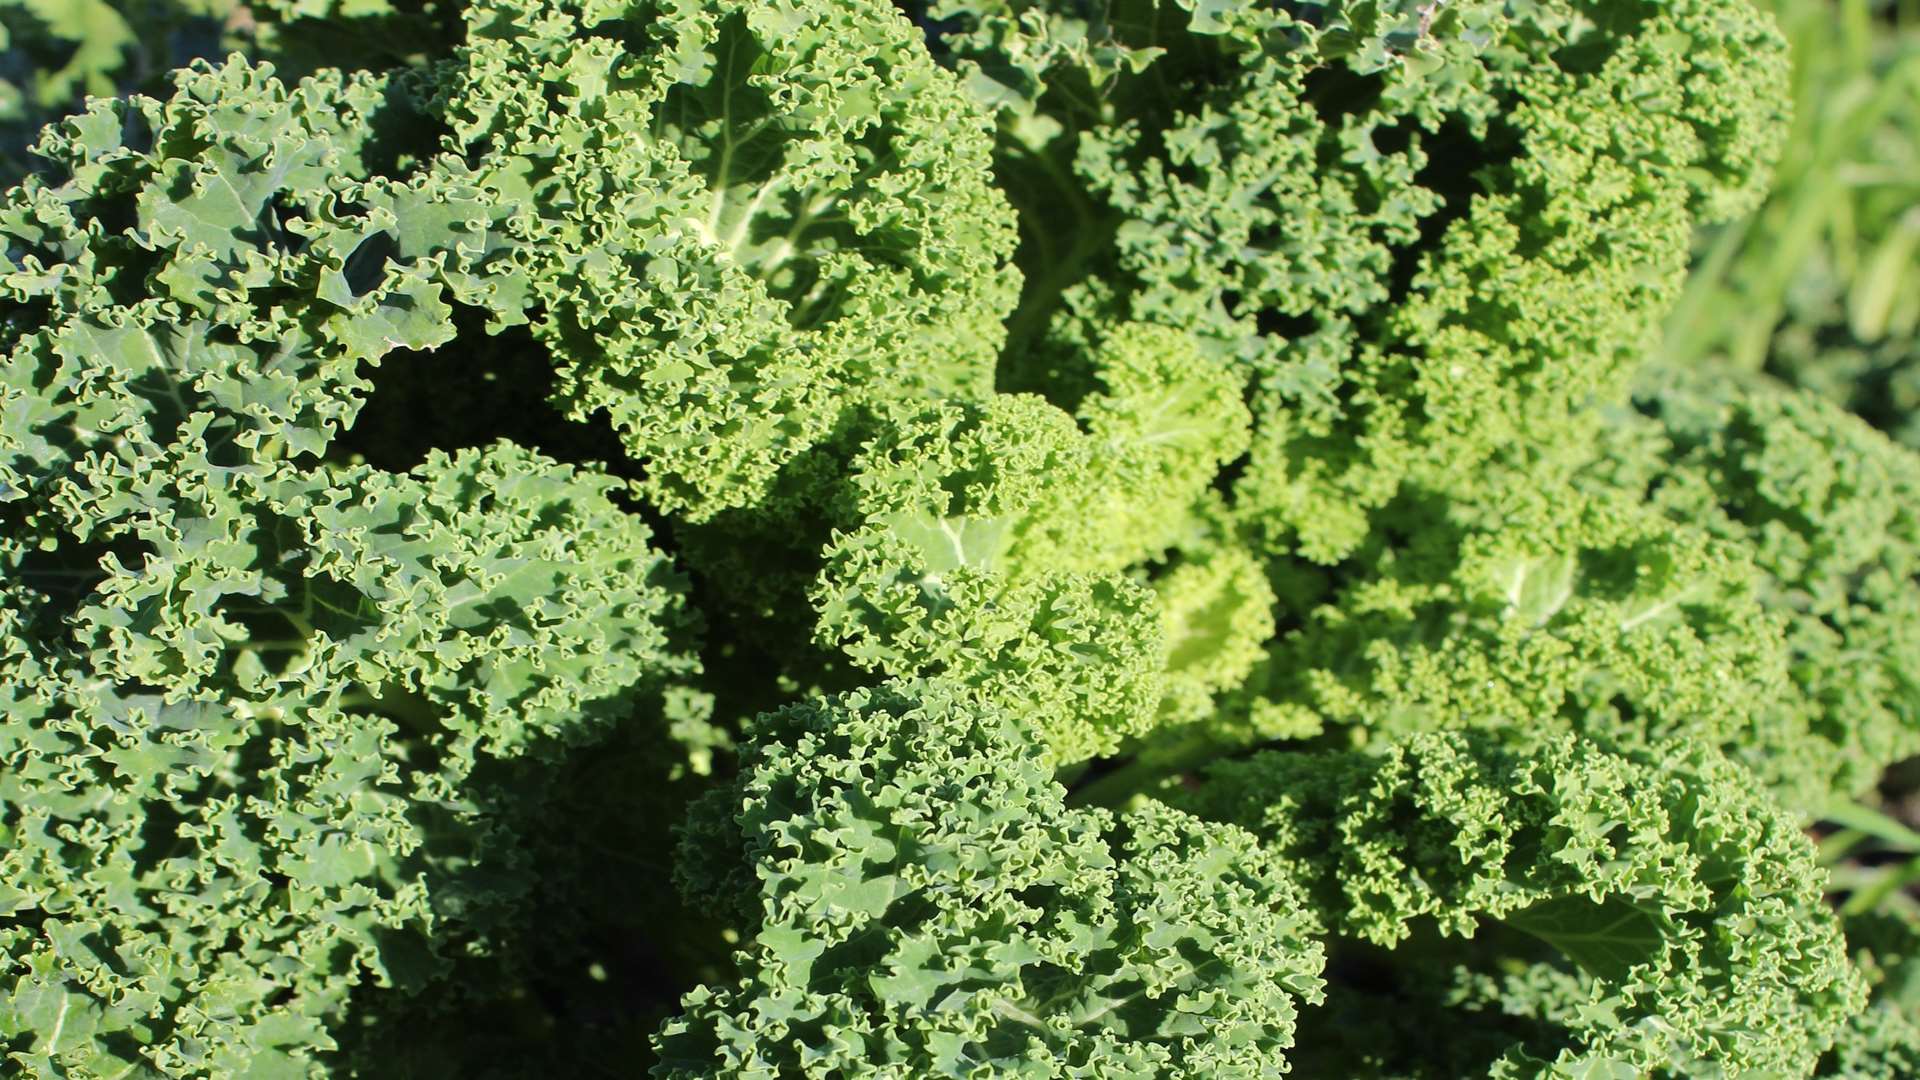 Kale is a real superfood